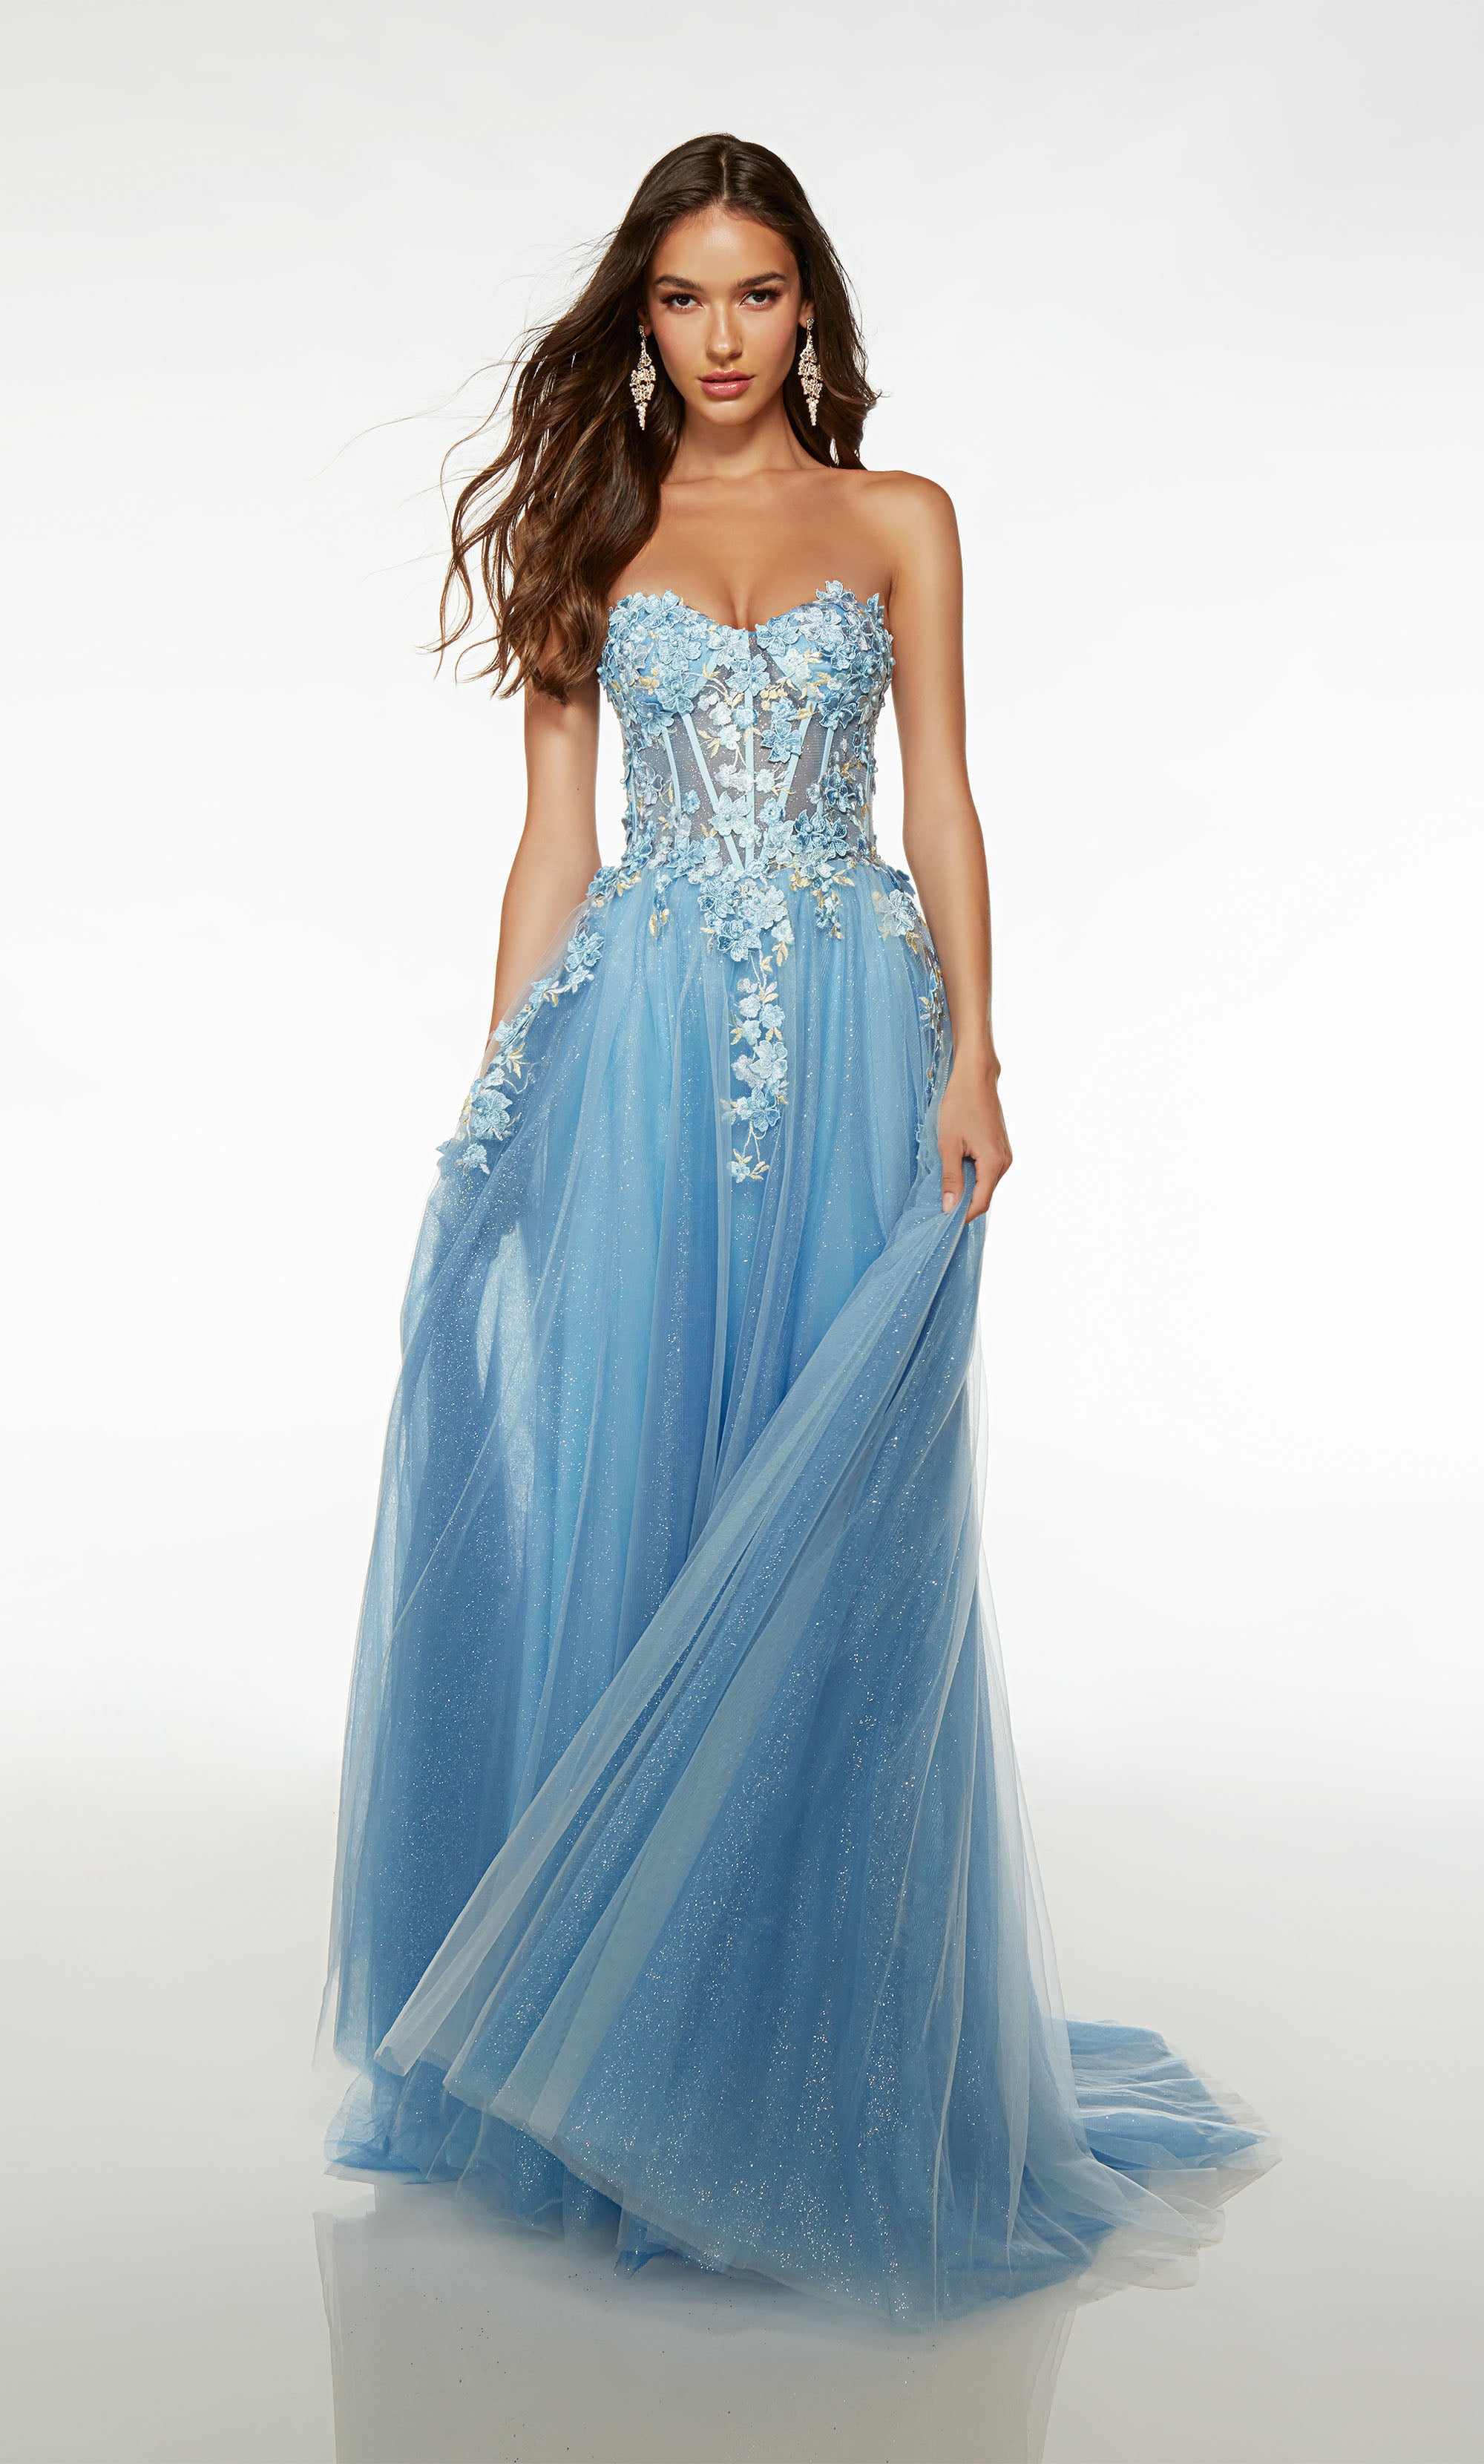 Ball Gown Sweetheart Tulle Sky Blue Prom Dress with Sequins –